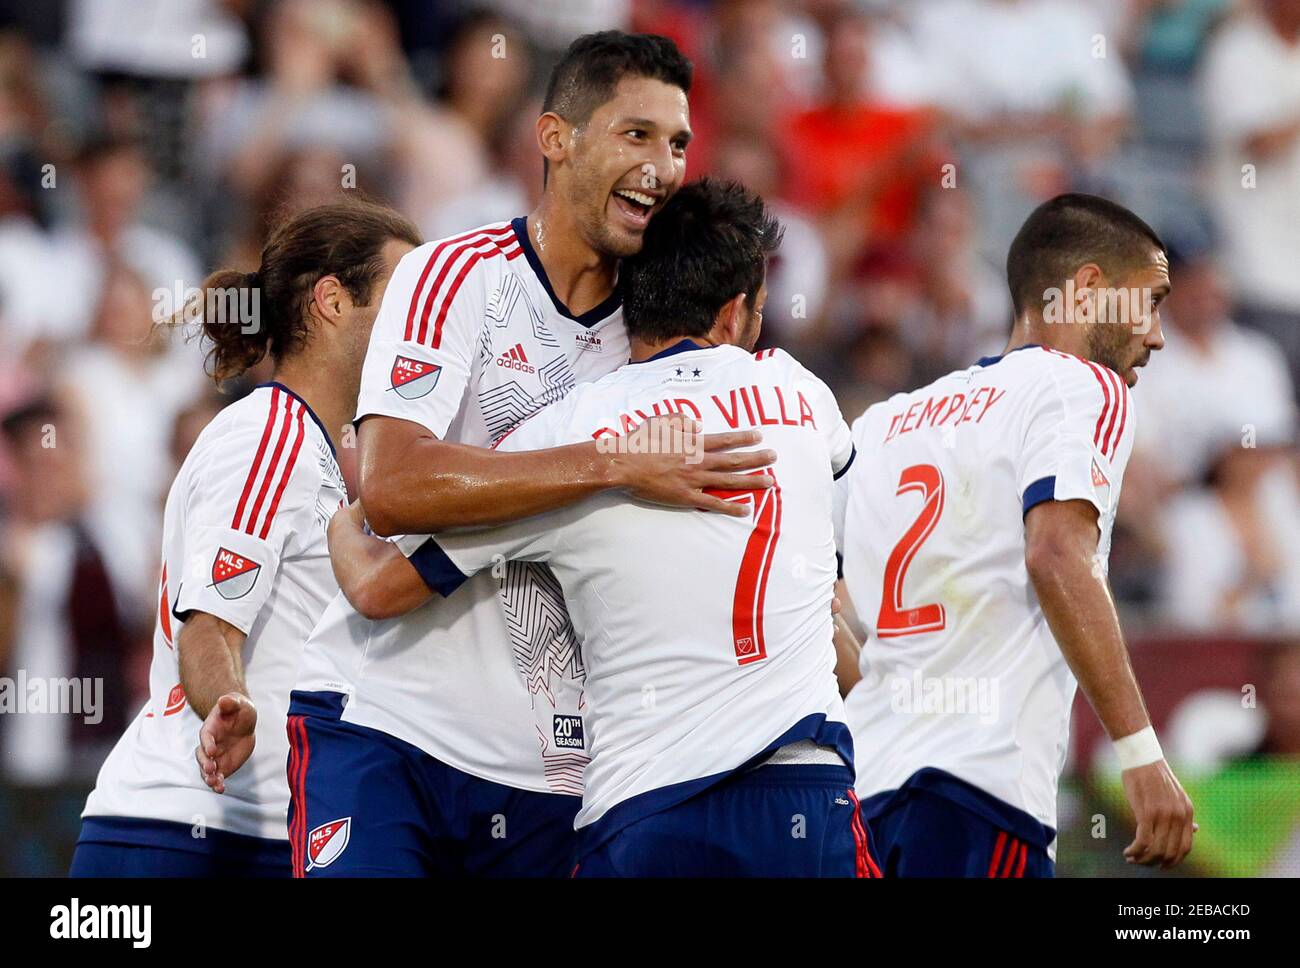 Football - MLS All-Stars v Tottenham Hotspur - AT&T MLS All Stars Game - Pre Season Friendly - Dick's Sporting Goods Park, Colorado, United States of America - 29/7/15  MLS All-Stars's Omar Gonzalez (2nd from L) and David Villa celebrate a goal  Action Images via Reuters / Rick Wilking  Livepic Stock Photo